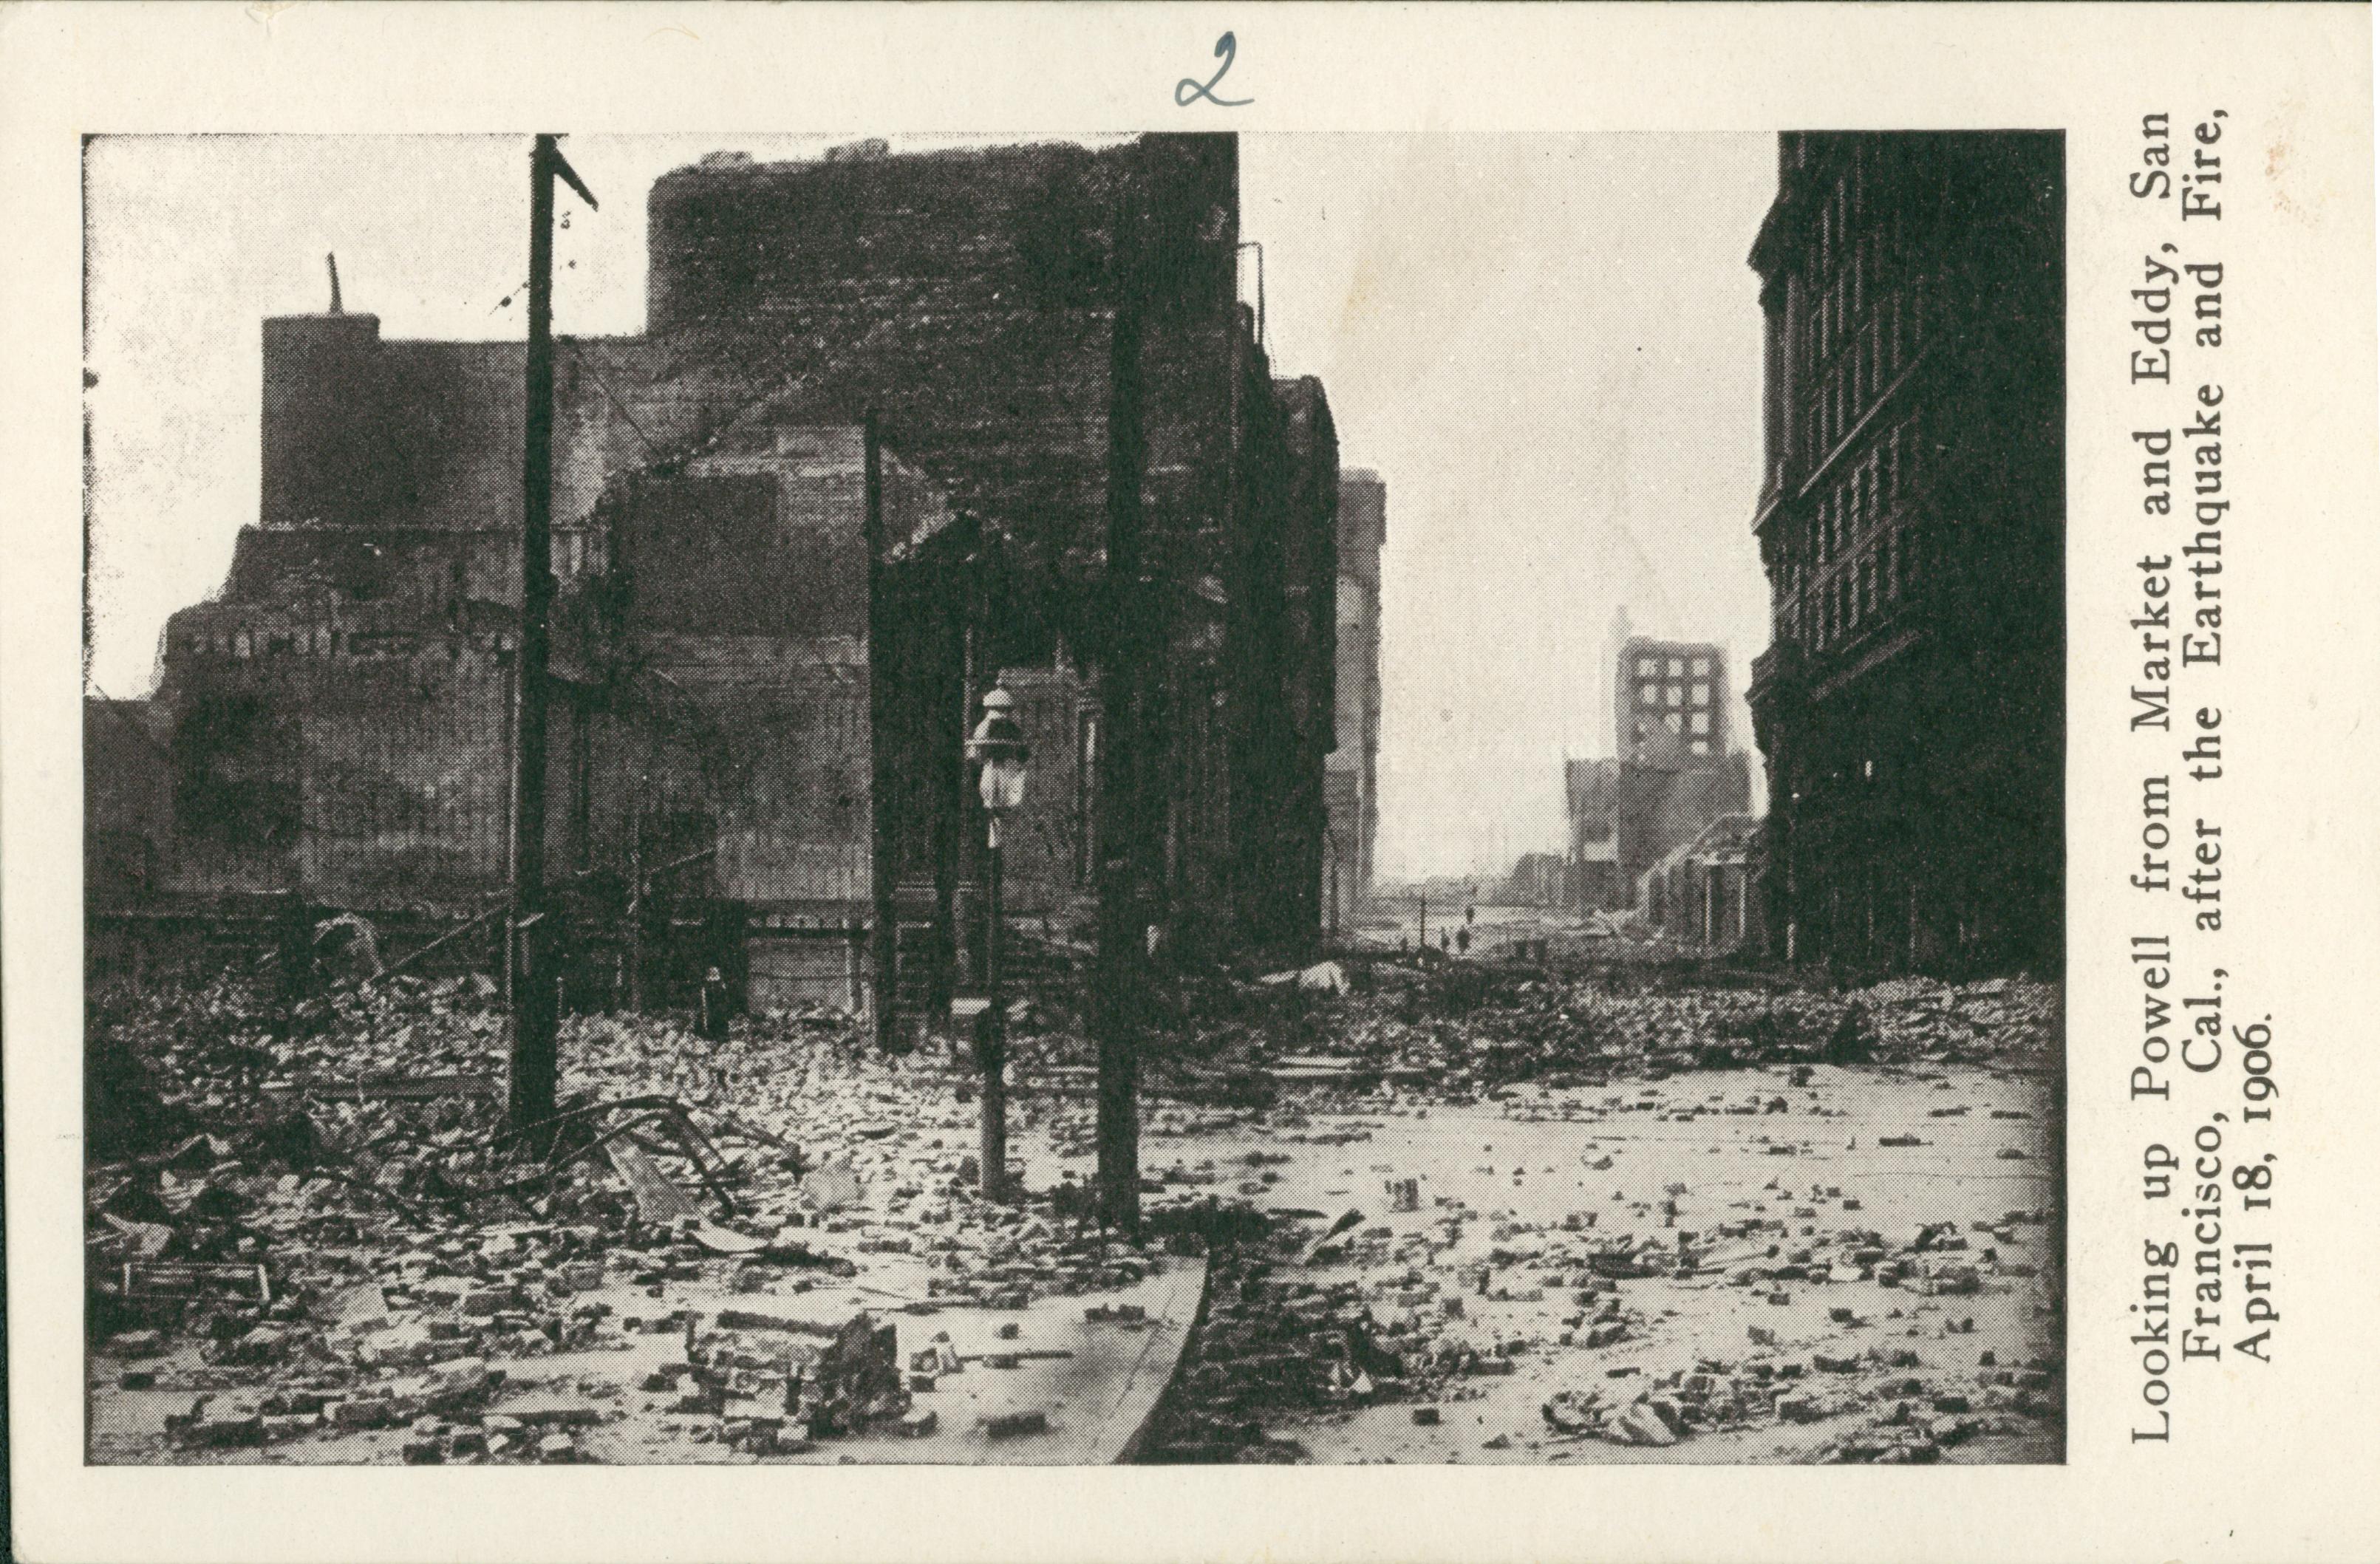 Shows the street covered in rubble with a collapsed building on the left.